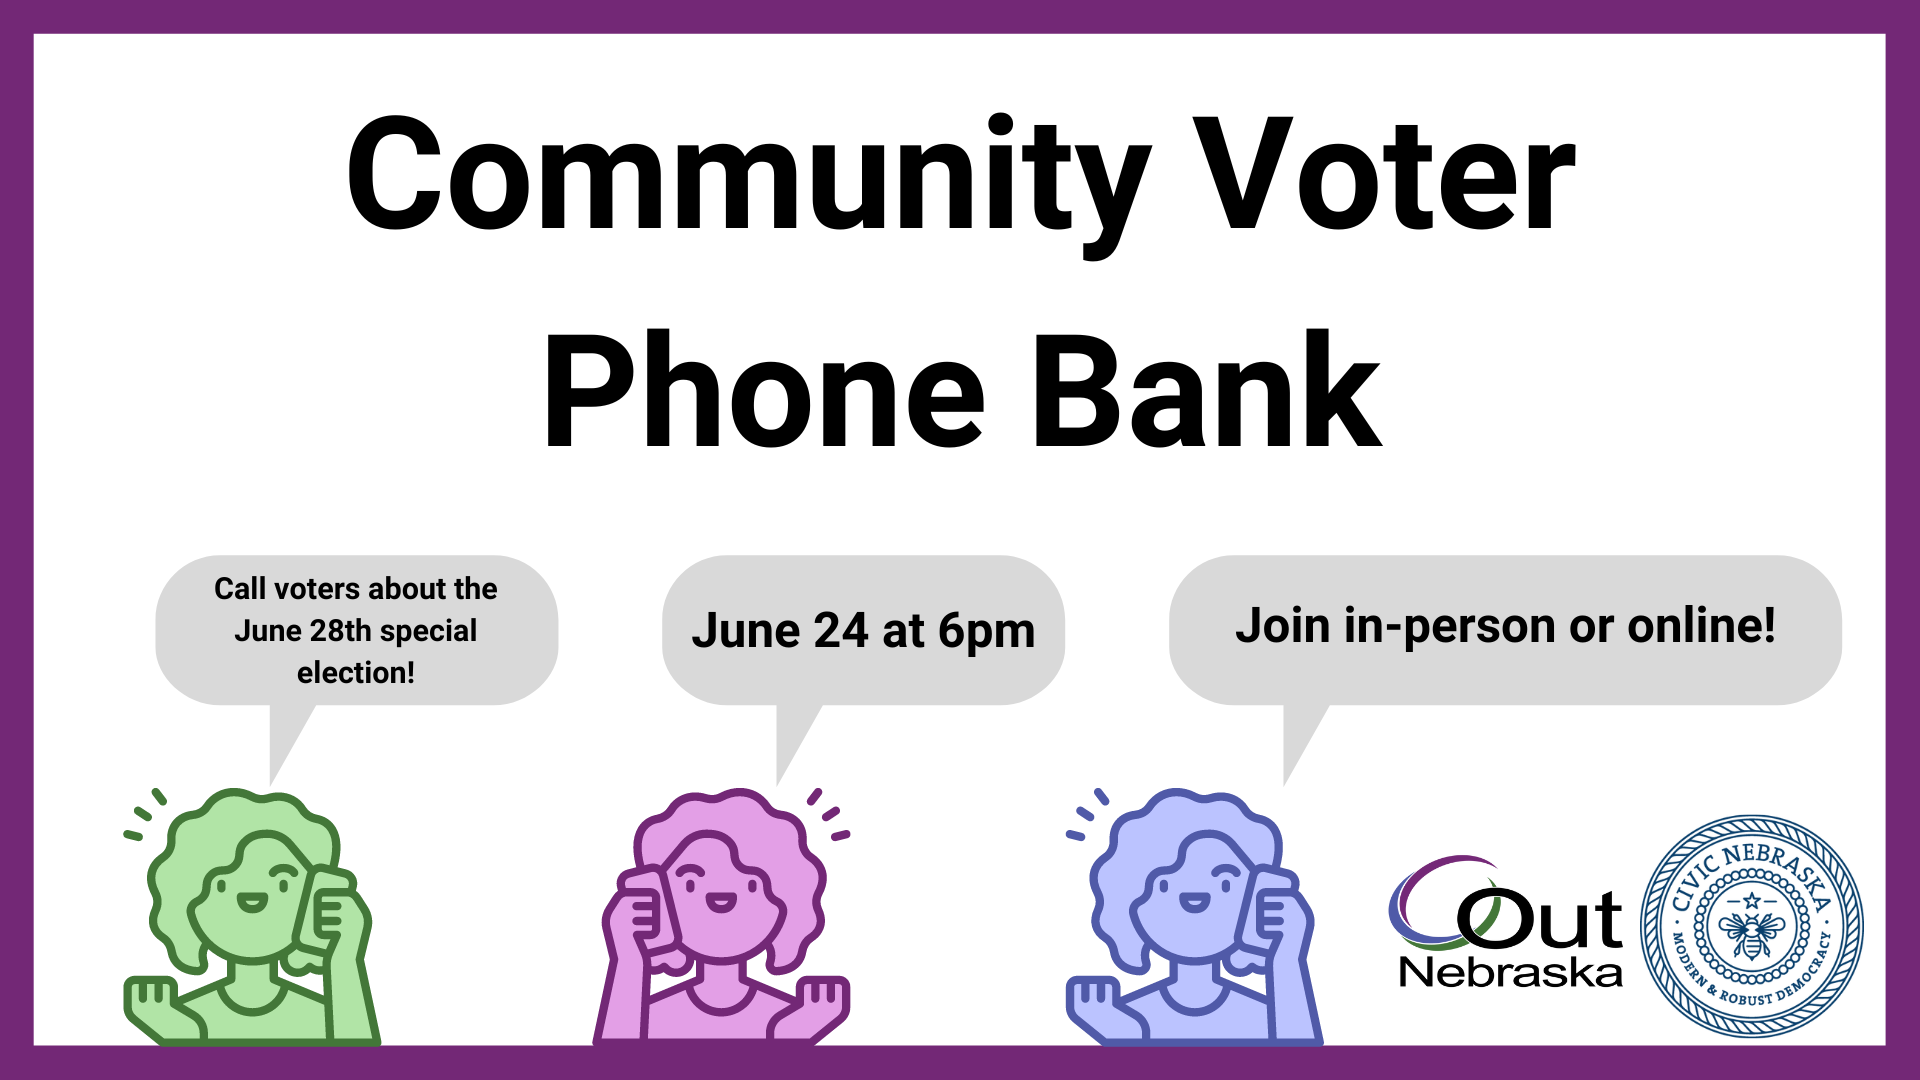 Community Voter Phone Bank. People along the bottom have little speech bubbles that say: "Call voters about the June 28th special election! June 24 at 6pm. Join in-person or online!